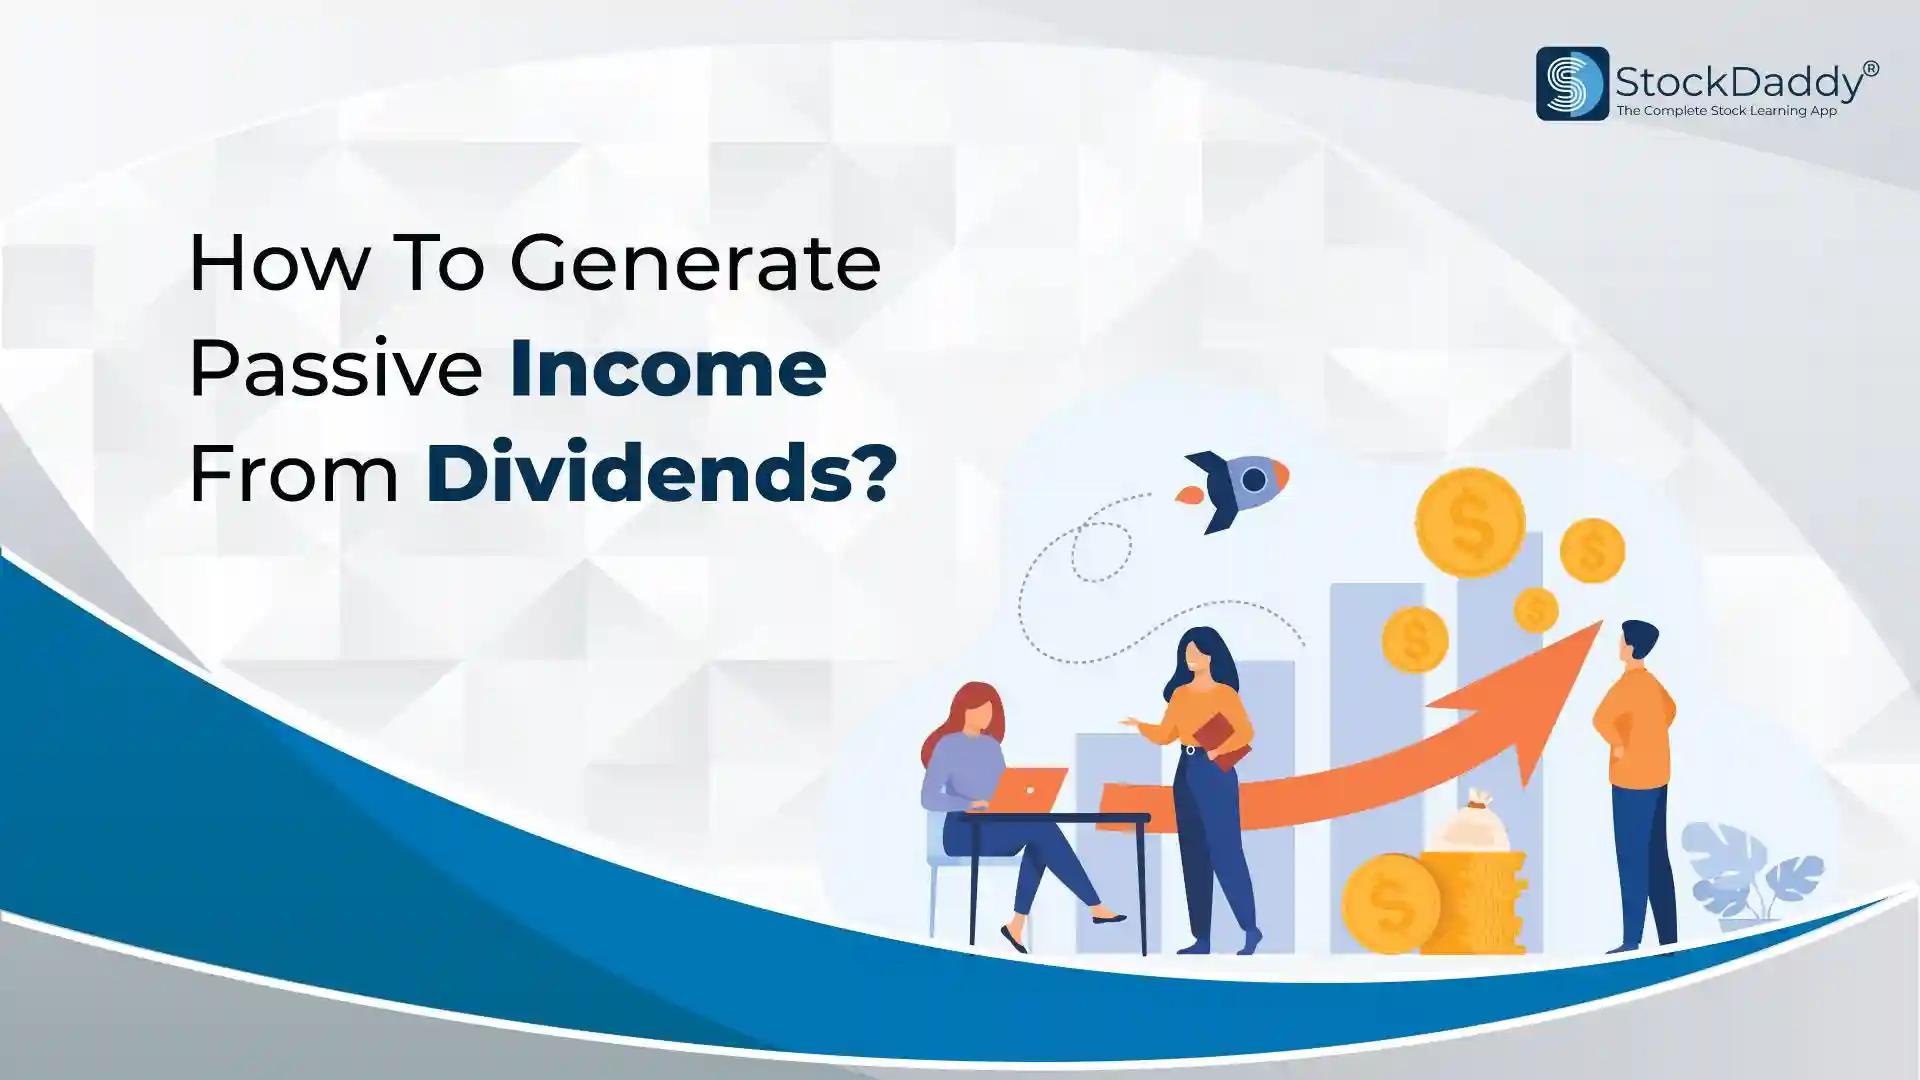 How to generate passive income from dividends?